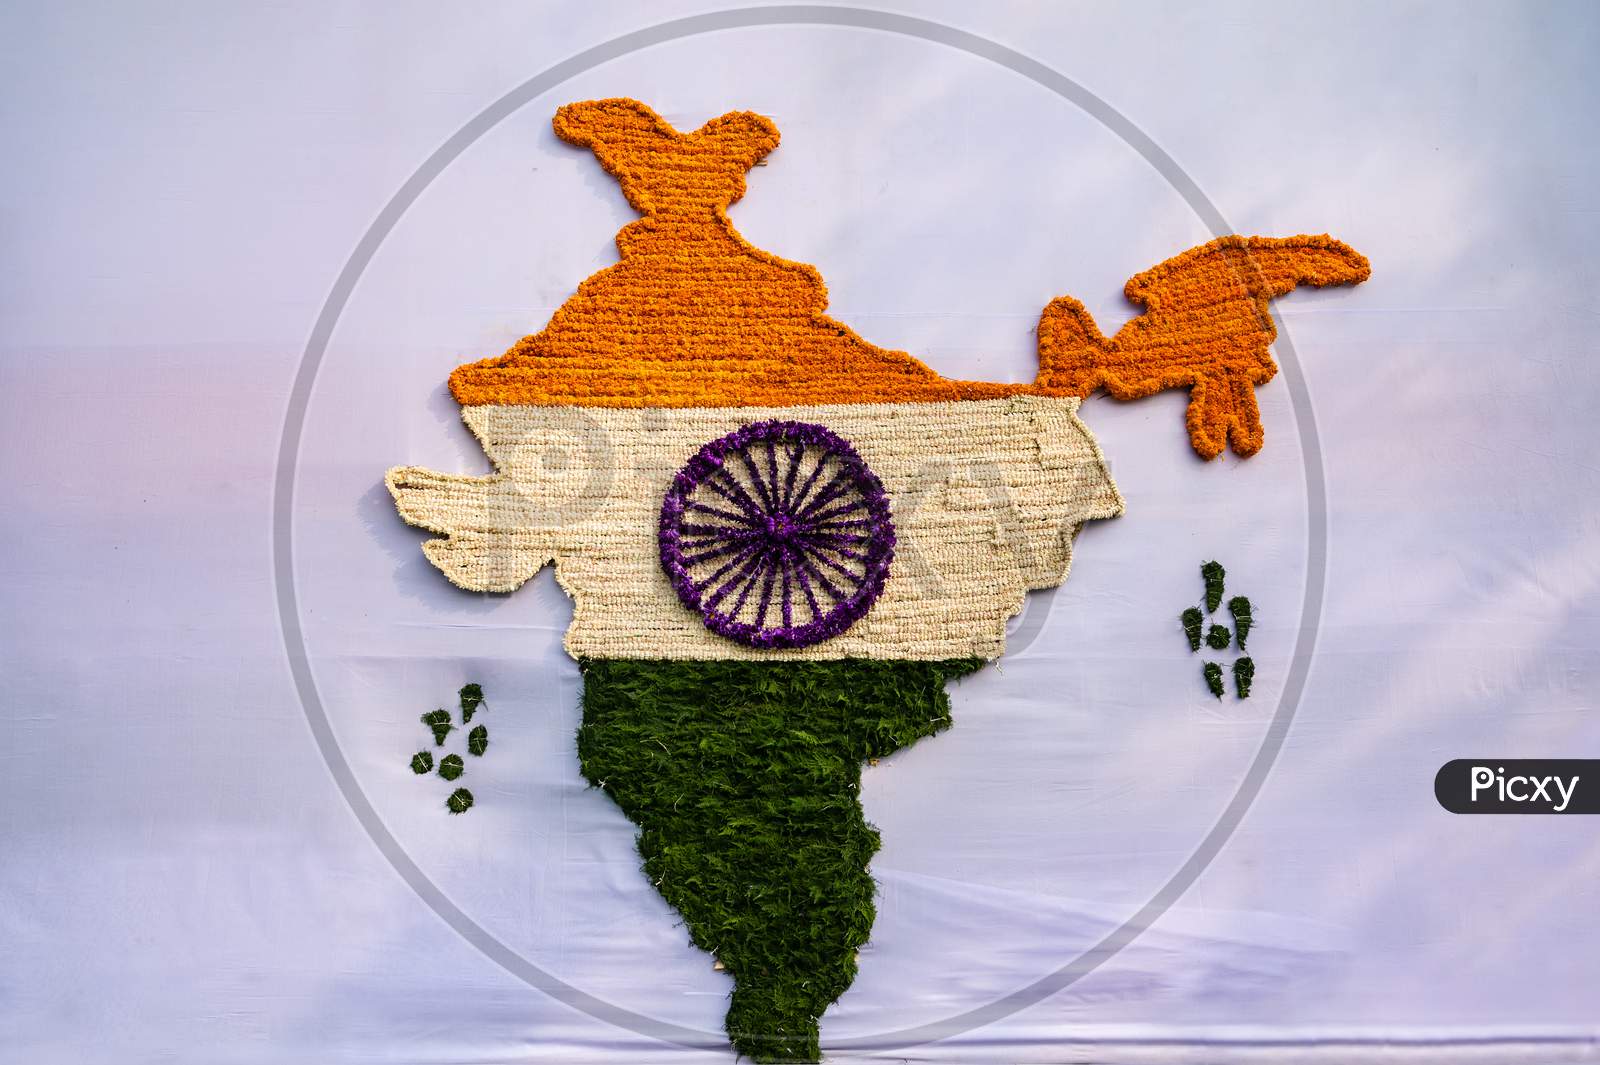 Indian map made of tricolor flowers on cloth on the occasion of Republic day.